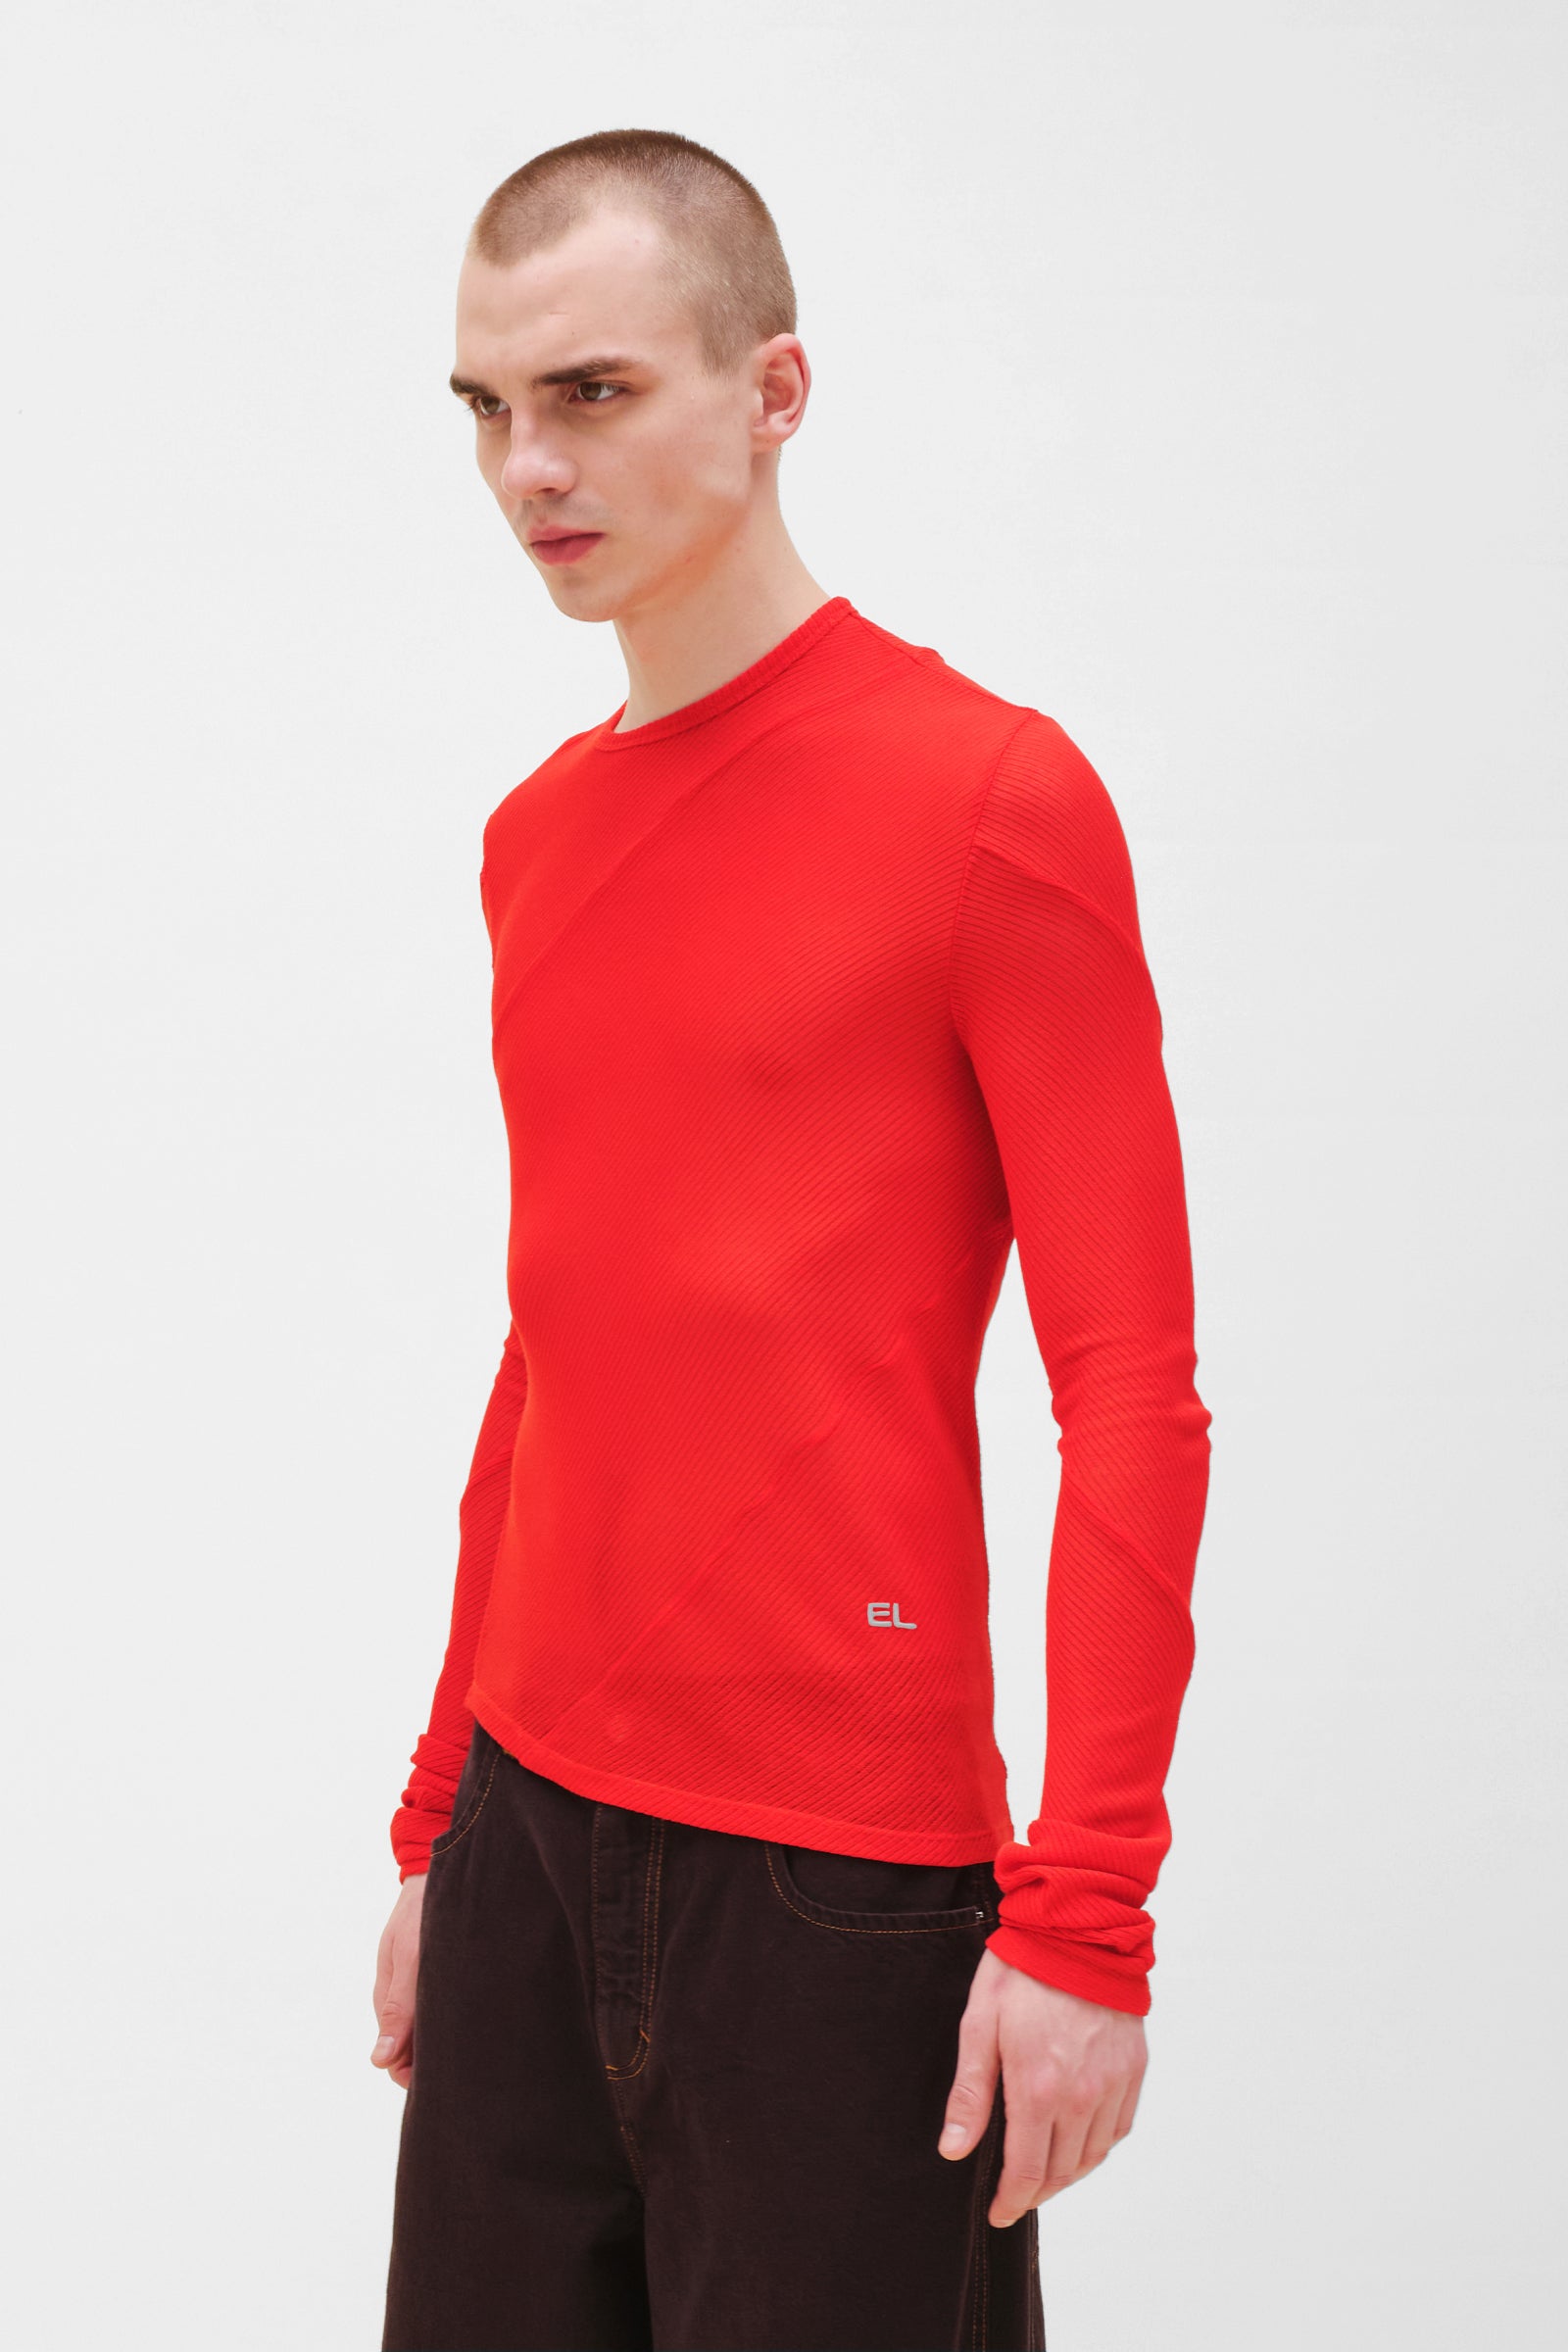 Spiral Long Sleeve in Red by Eckhaus Latta